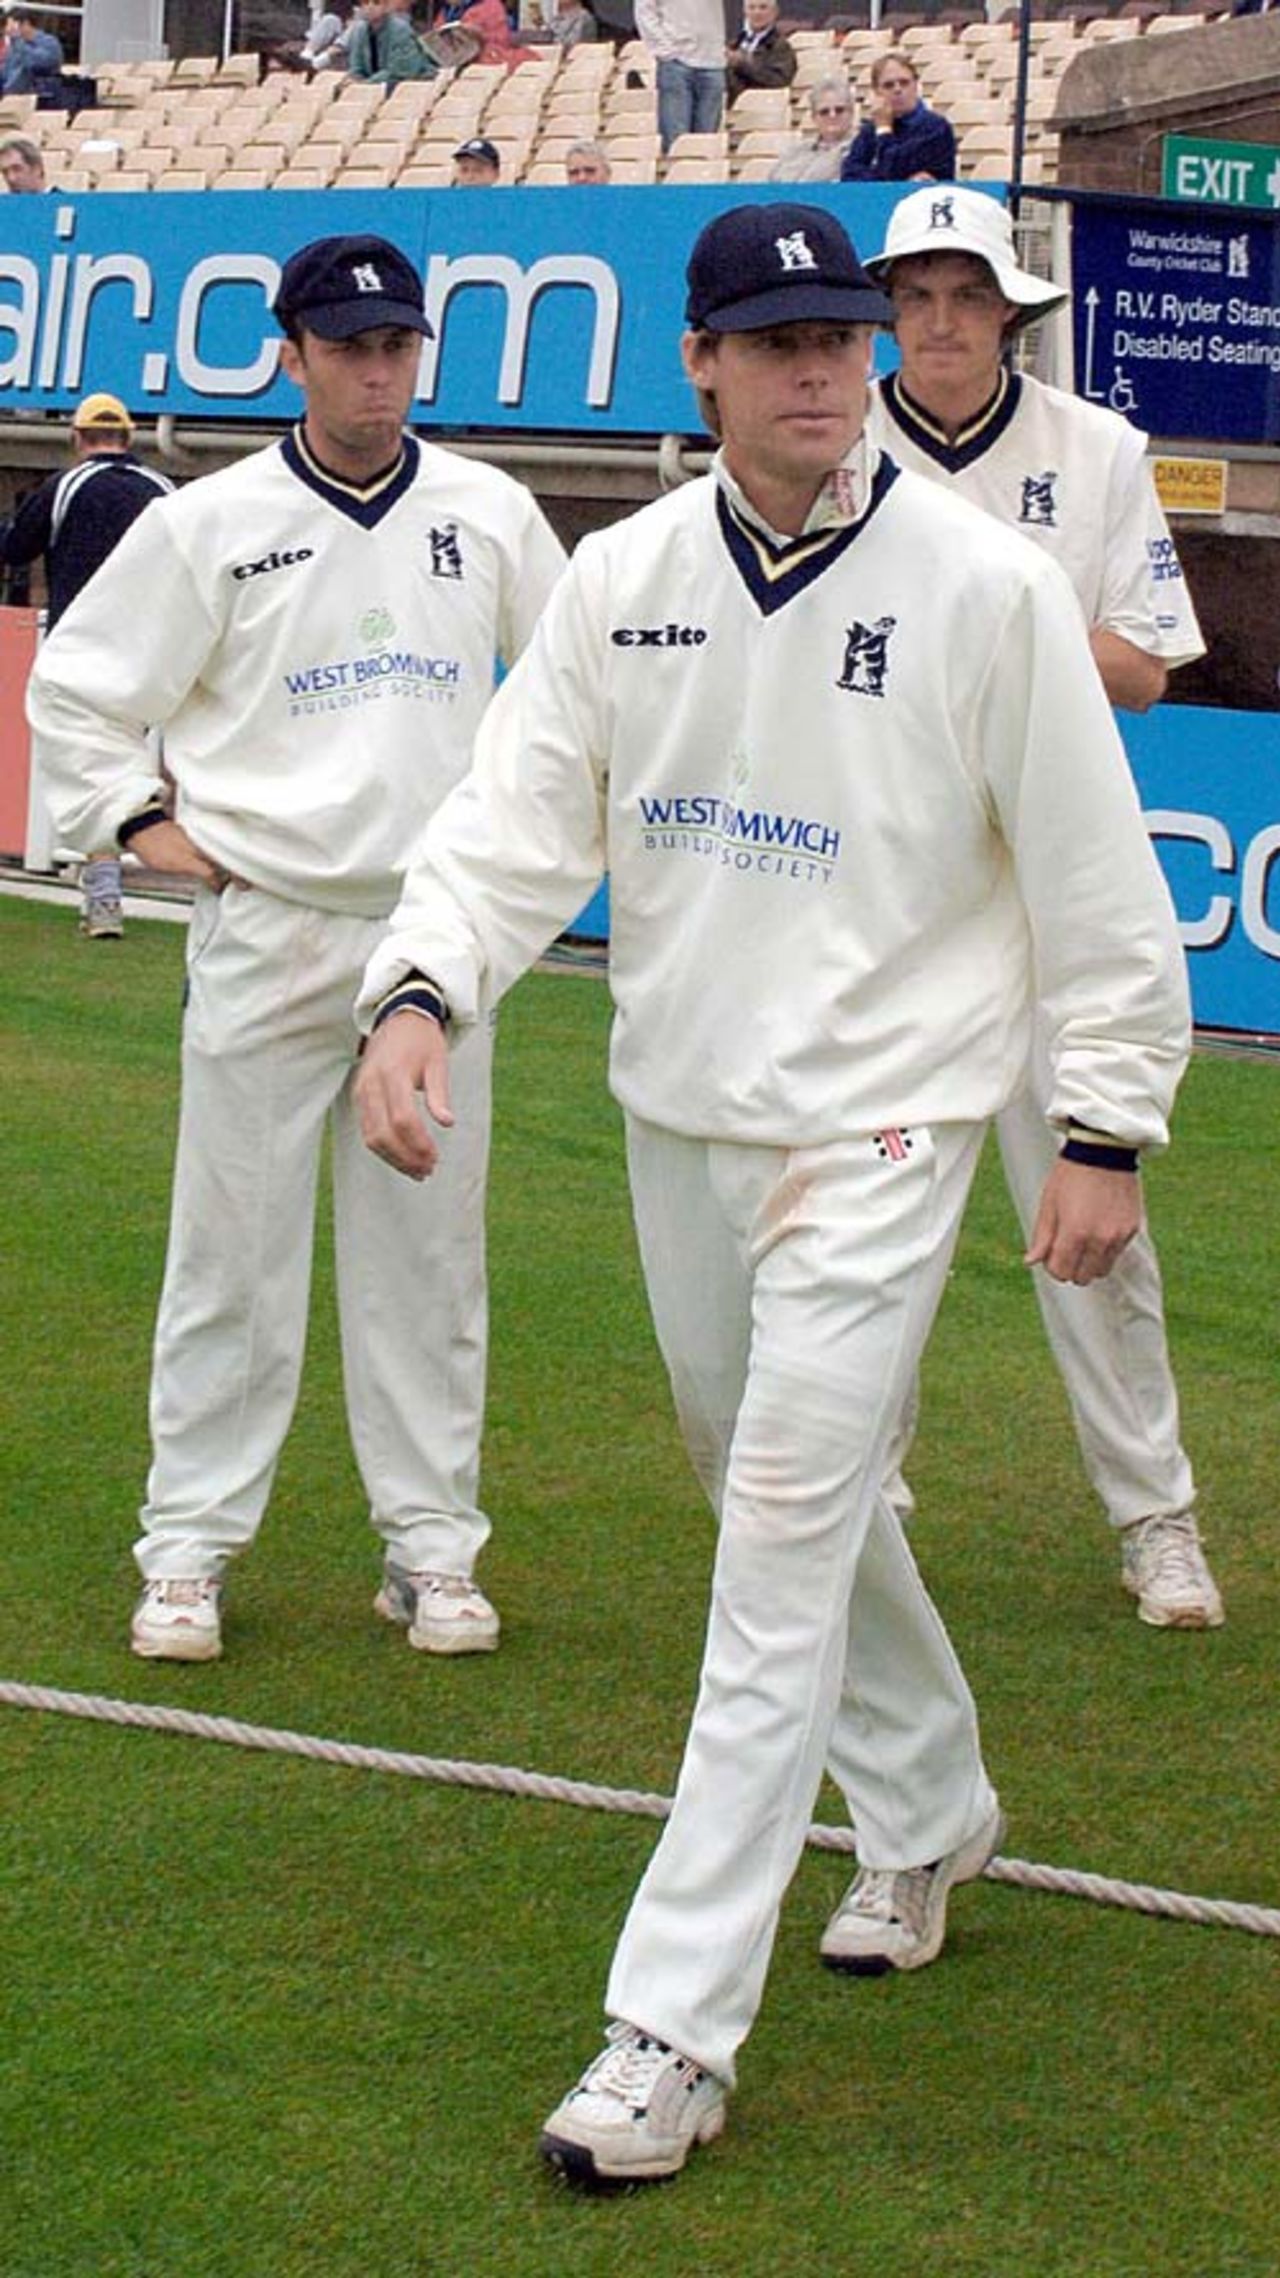 Nick Knight takes to the field for the last time, Warwickshire v Kent, Edgbaston, September 16, 2006